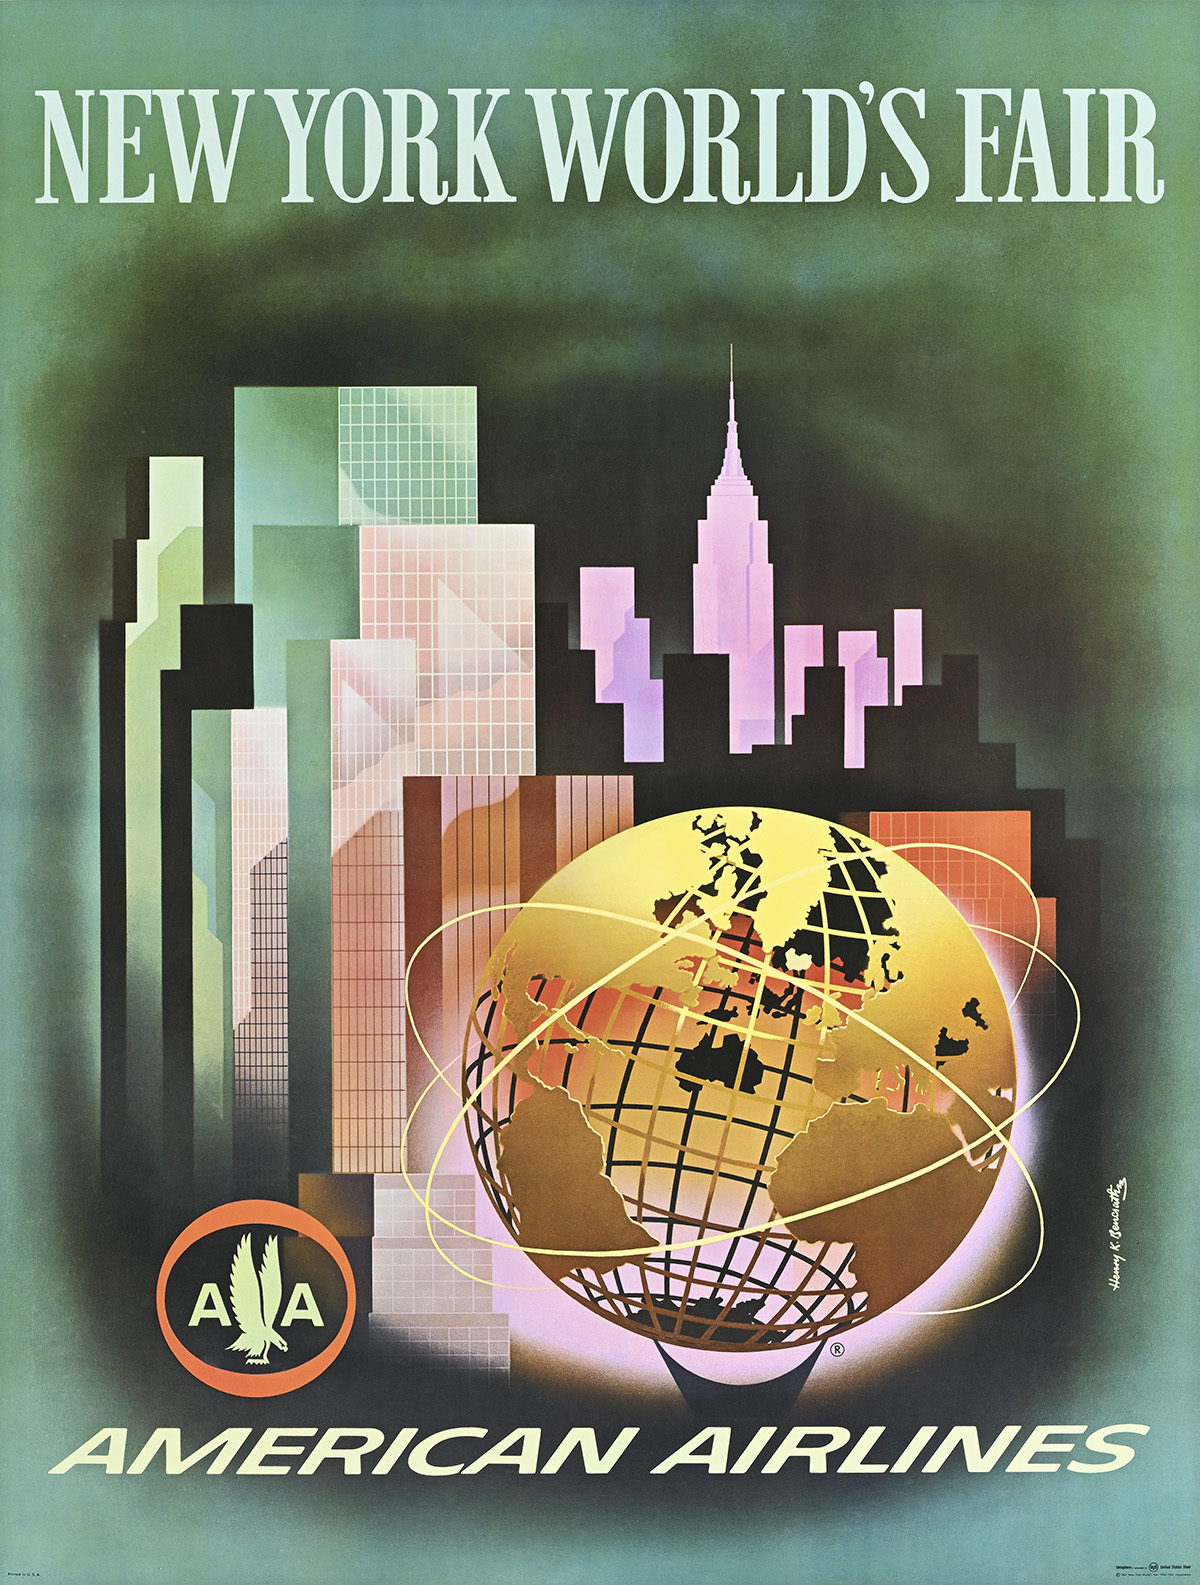 A geometric-style poster of an Earth statue with 3 oribital rings on the New York City skyline.